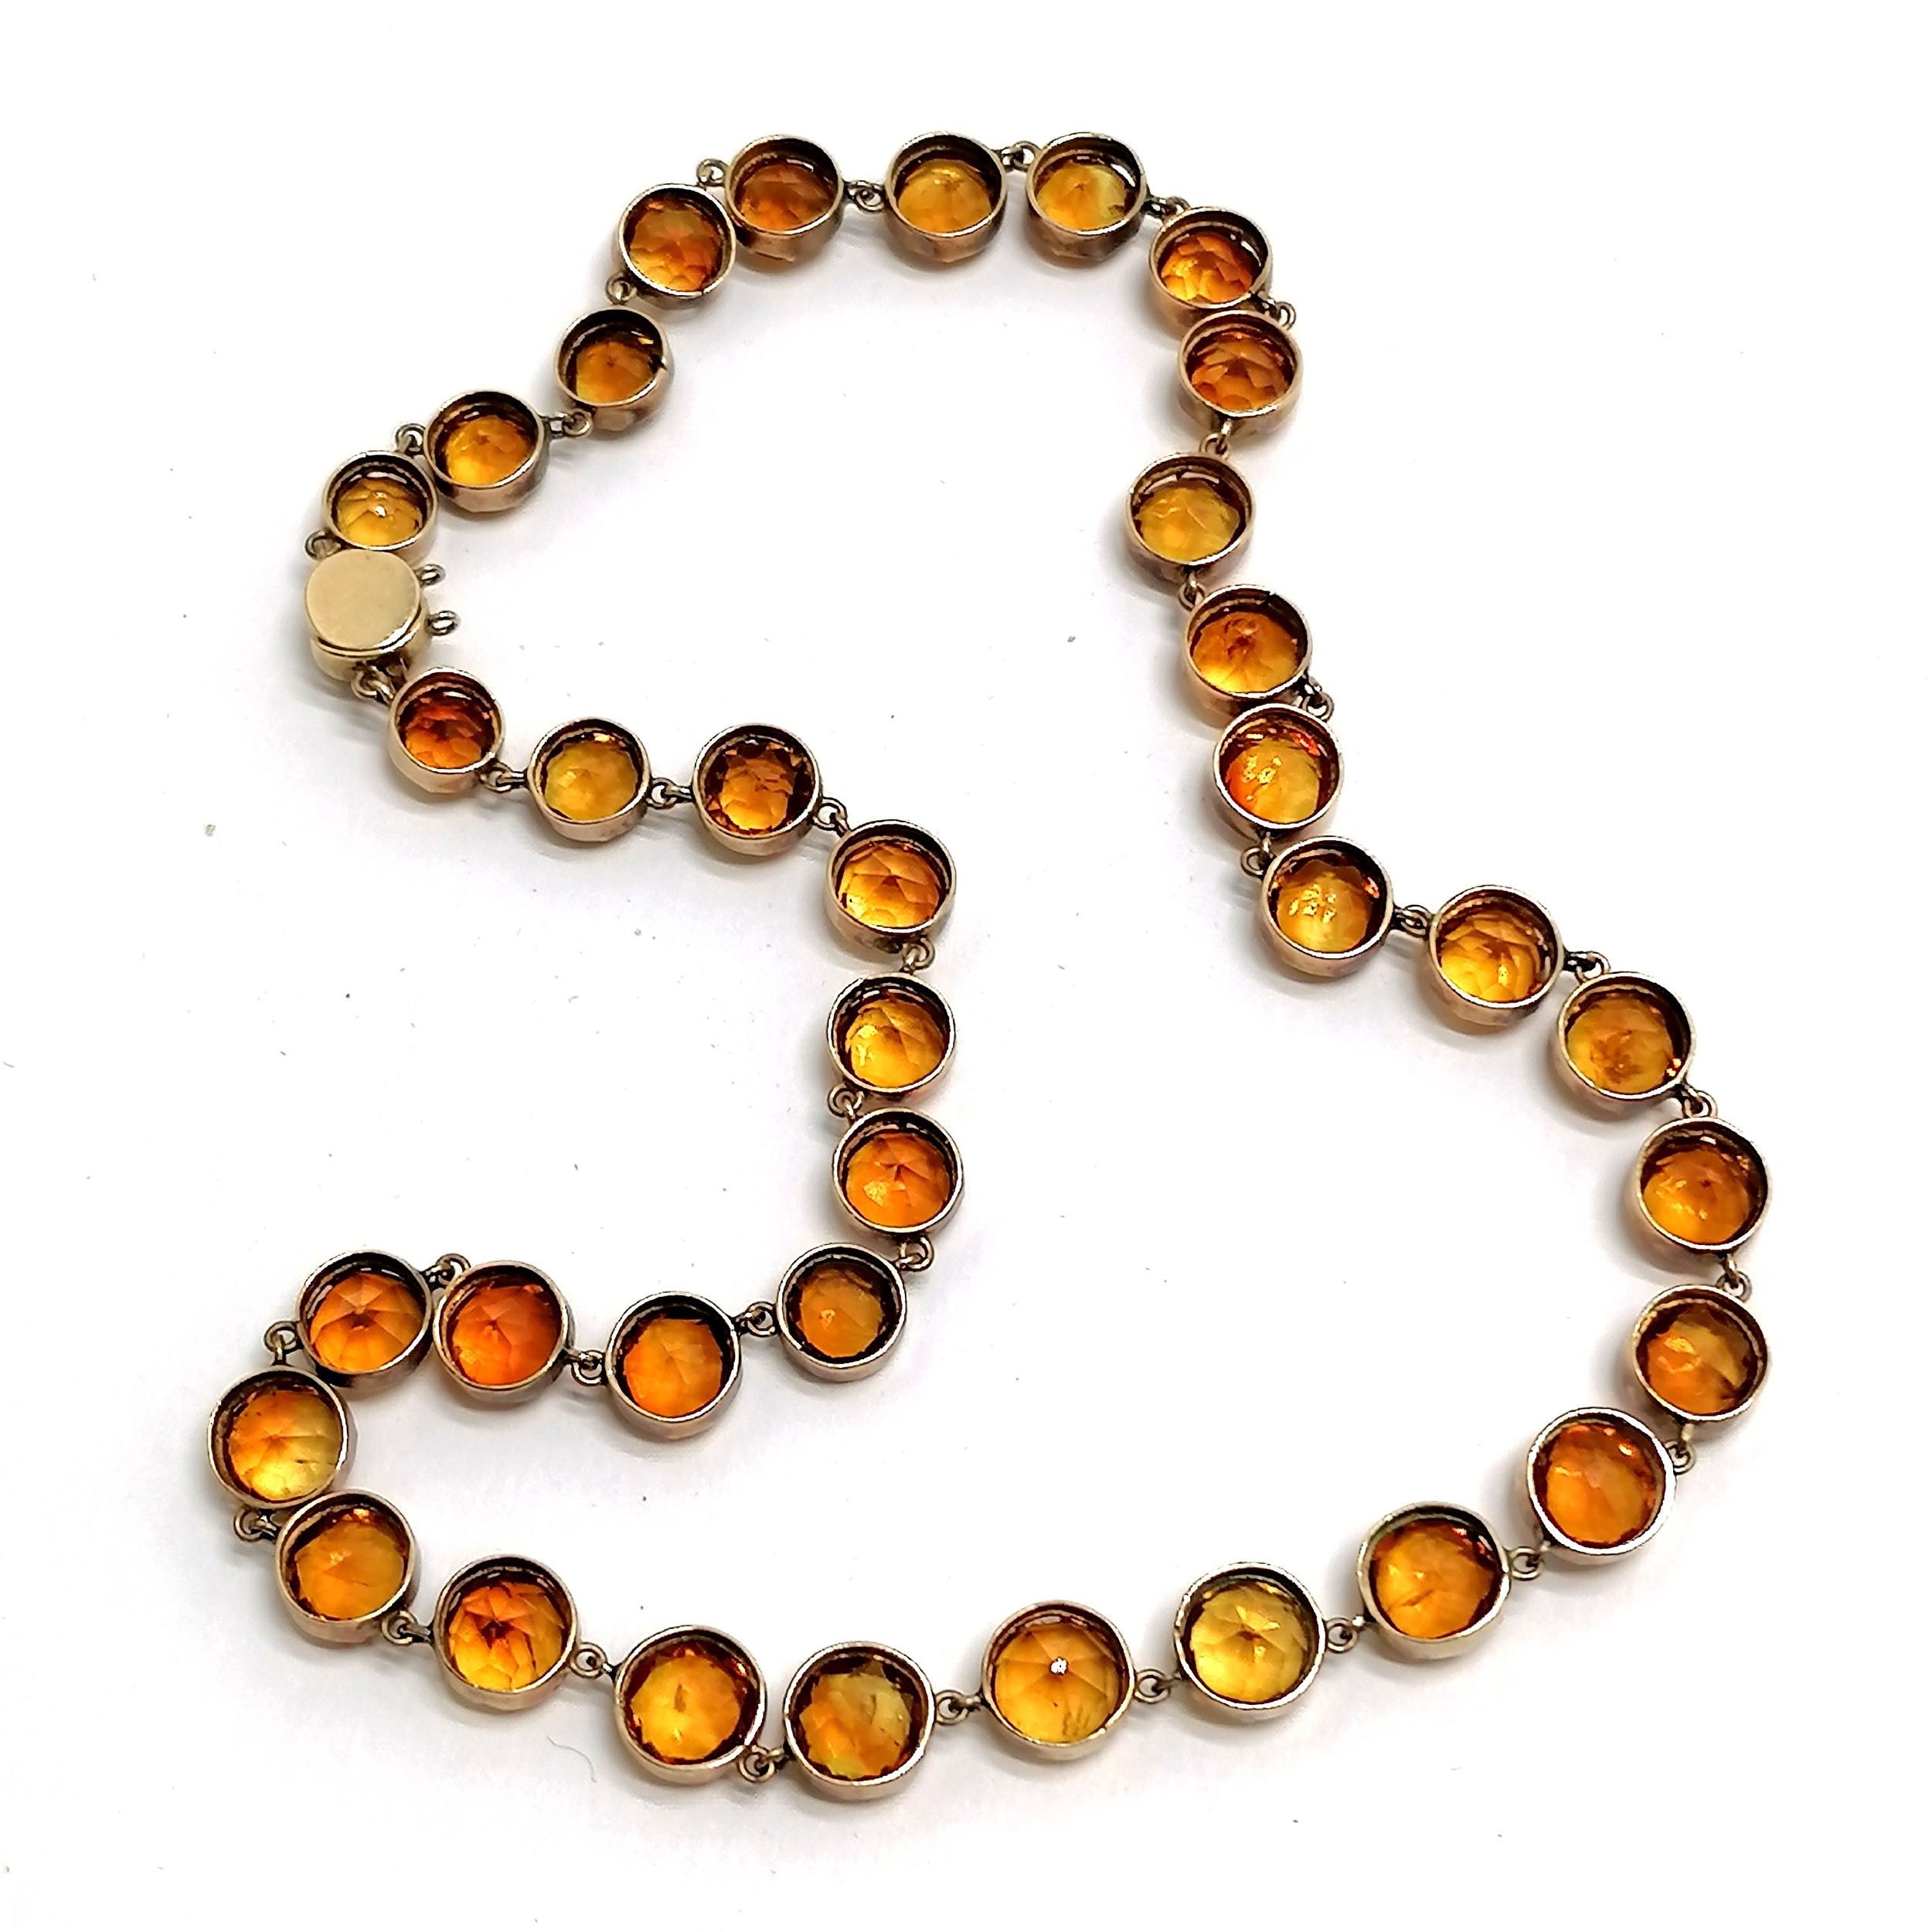 Antique unmarked rose gold citrine stone set necklace - 38cm & 20.5g total weight ~ no obvious - Image 2 of 3